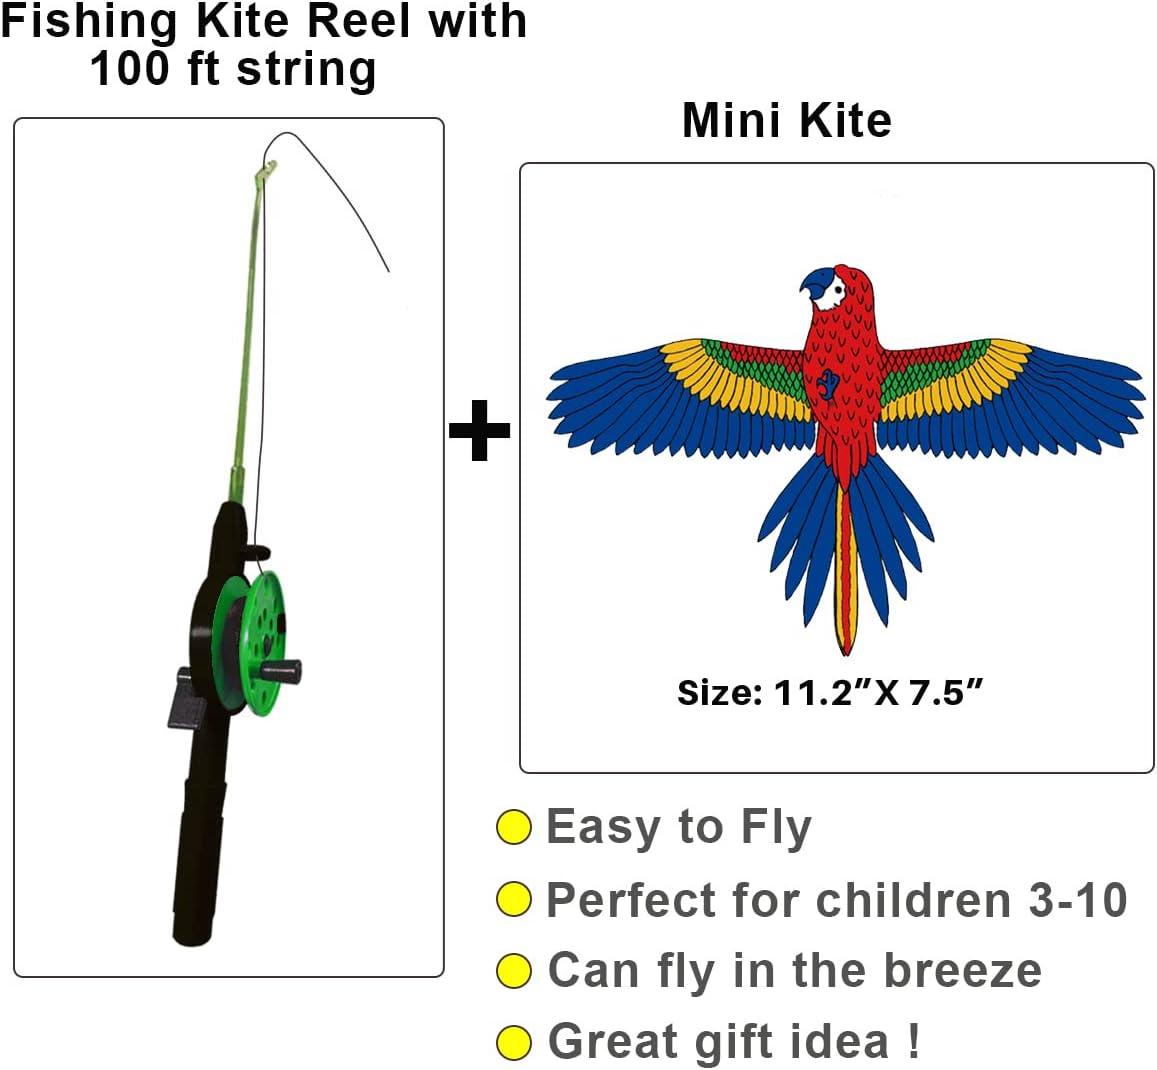 Mini Kite for Kids Ages 3-8, Kites for Toddlers Age 3-5 Easy to